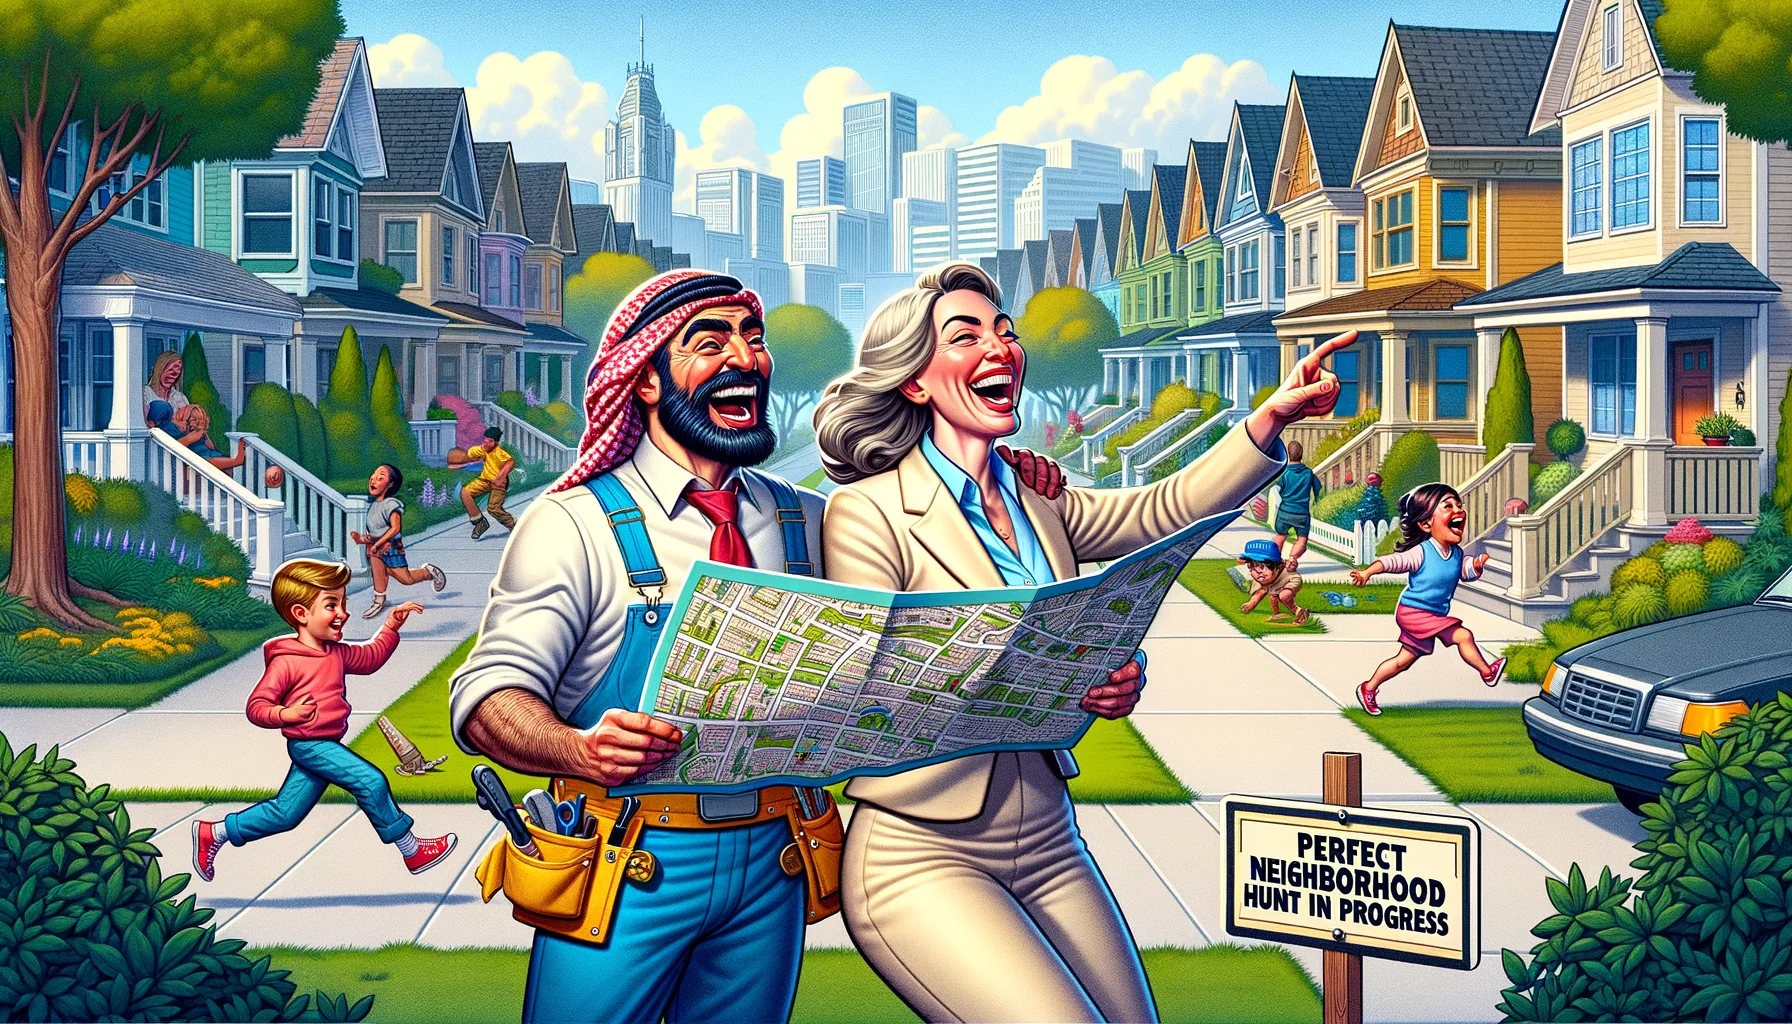 Generate a humorous and realistic visual capturing an ideal scenario of choosing the right neighborhood. The scene includes a couple with a map venturing through a vibrant street. The man is Middle-Eastern, wearing a handyman outfit, and energetically pointing at various houses. The woman is Caucasian, dressed in a chic business suit, holding the map, and laughing joyously. The neighborhood is refreshing, filled with diverse greenery, historical homes, children playing safely on the streets, and friendly neighbors of various descents waving hello. A signboard in the foreground humorously says 'Perfect Neighborhood Hunt in Progress'.